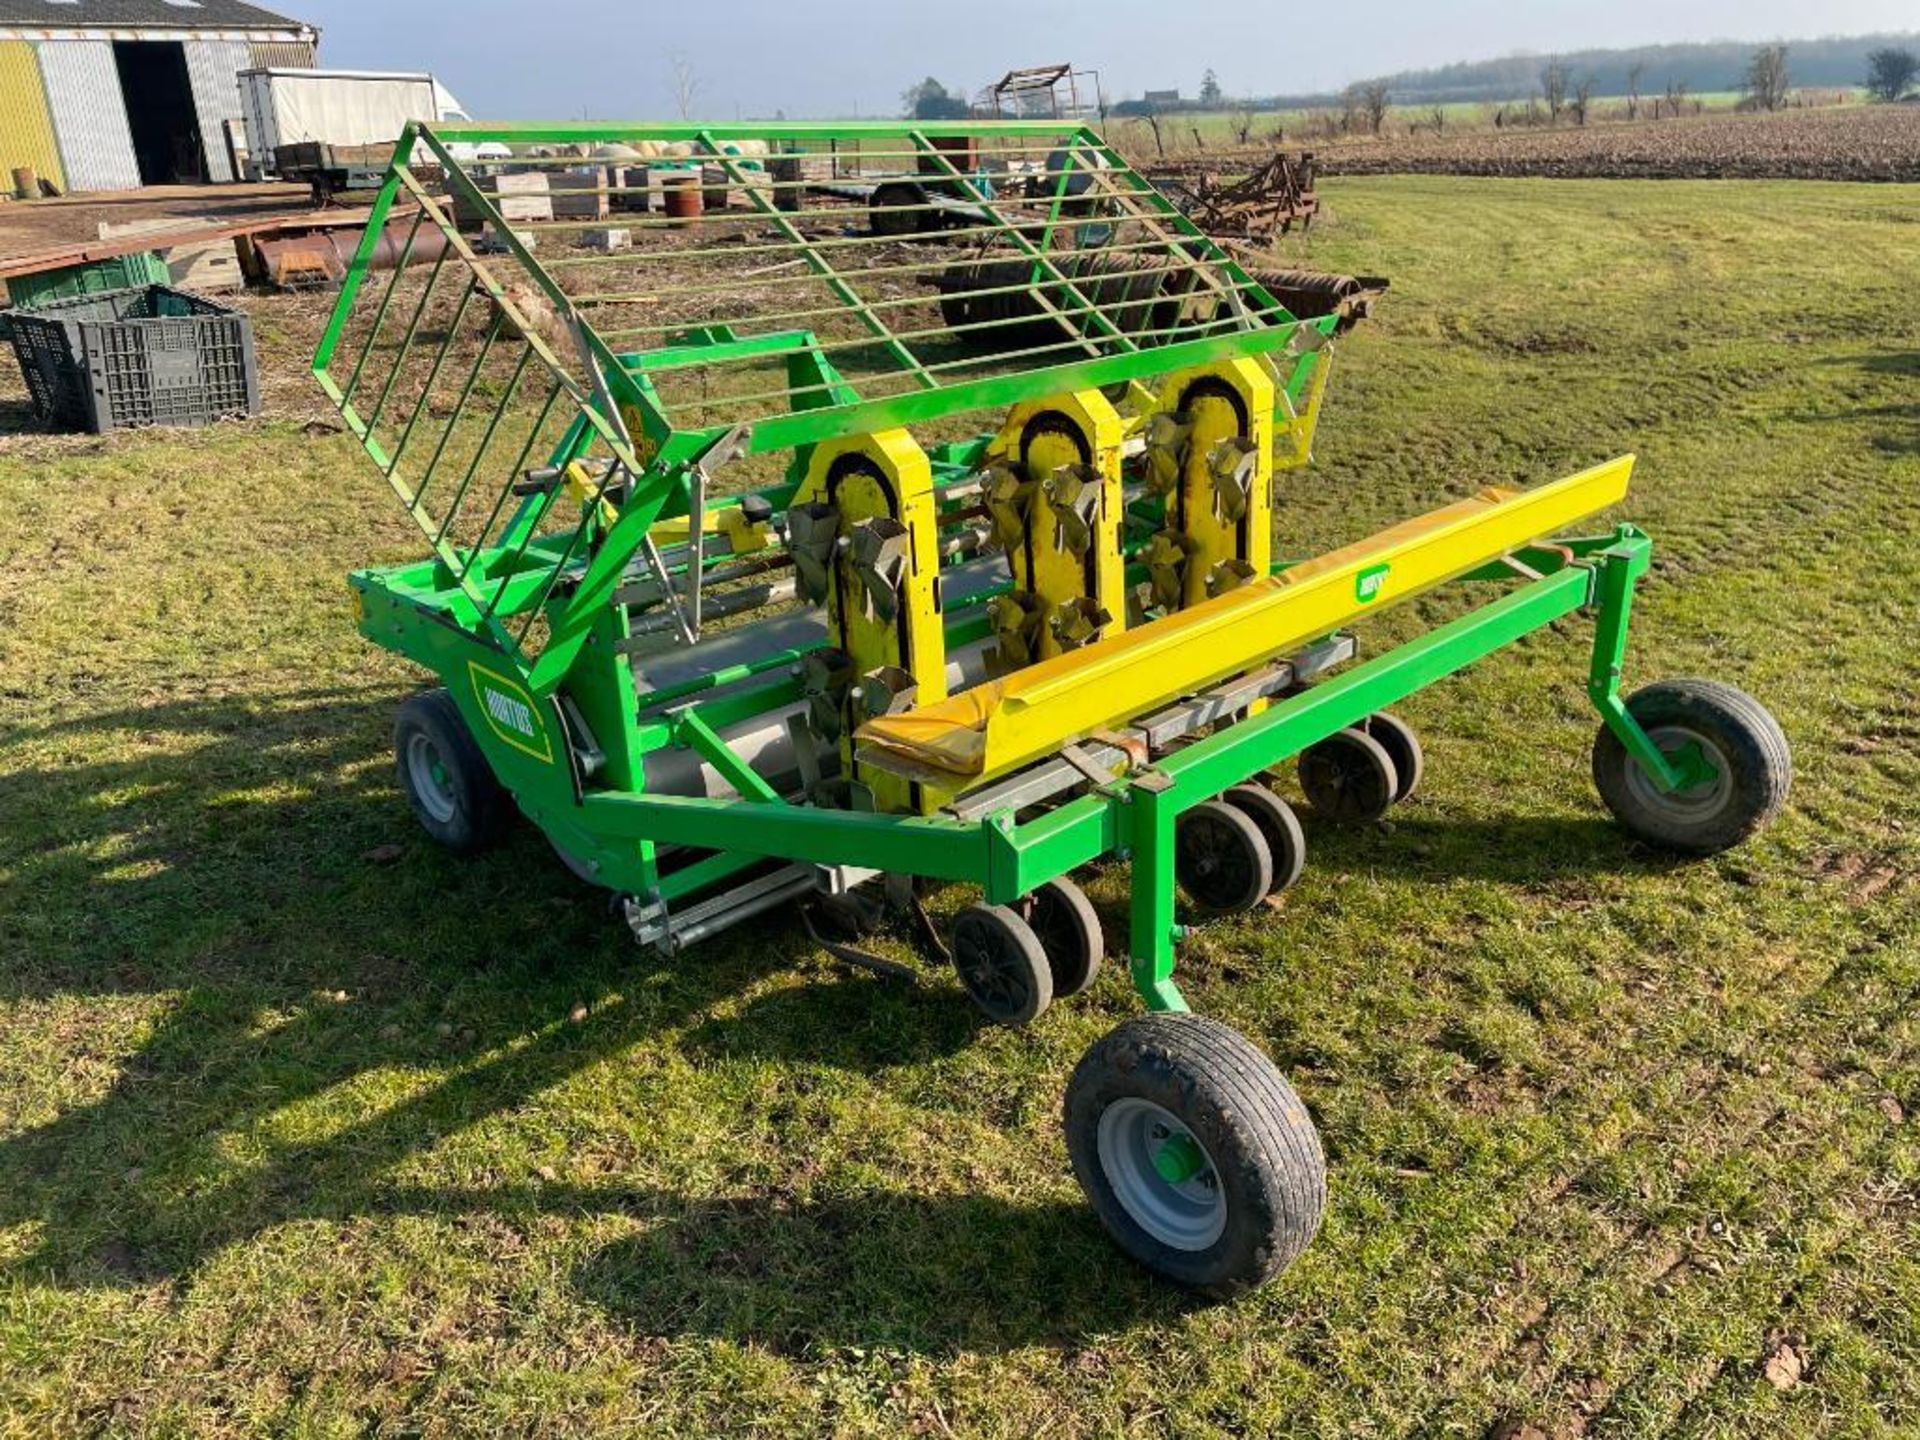 2006 Hortech Hortus Due H2 192 manual 3 row planter for large seeds, modules & nursery stock with po - Image 6 of 11